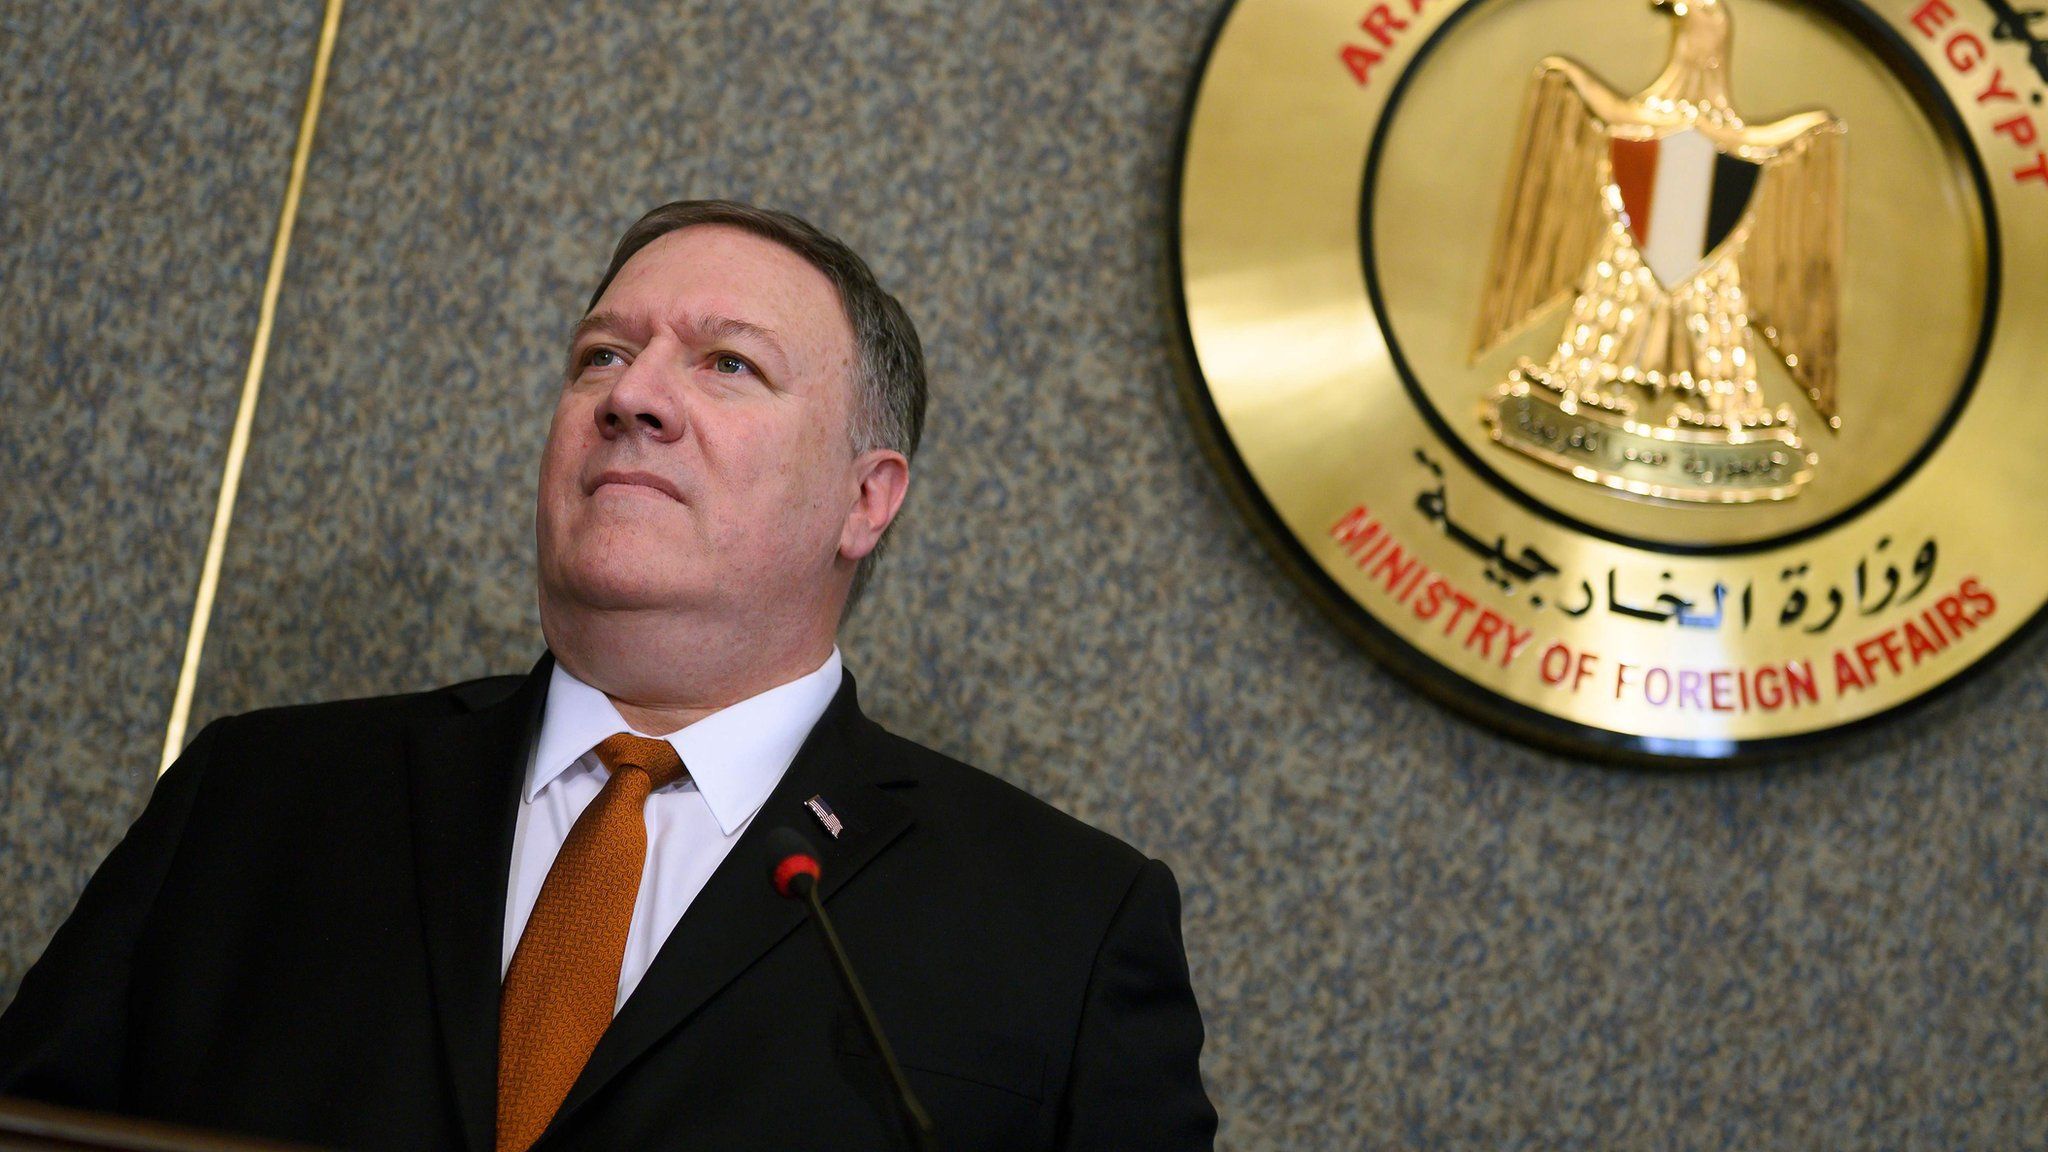 US Secretary of State Mike Pompeo in Cairo, Egypt (10 January 2019)